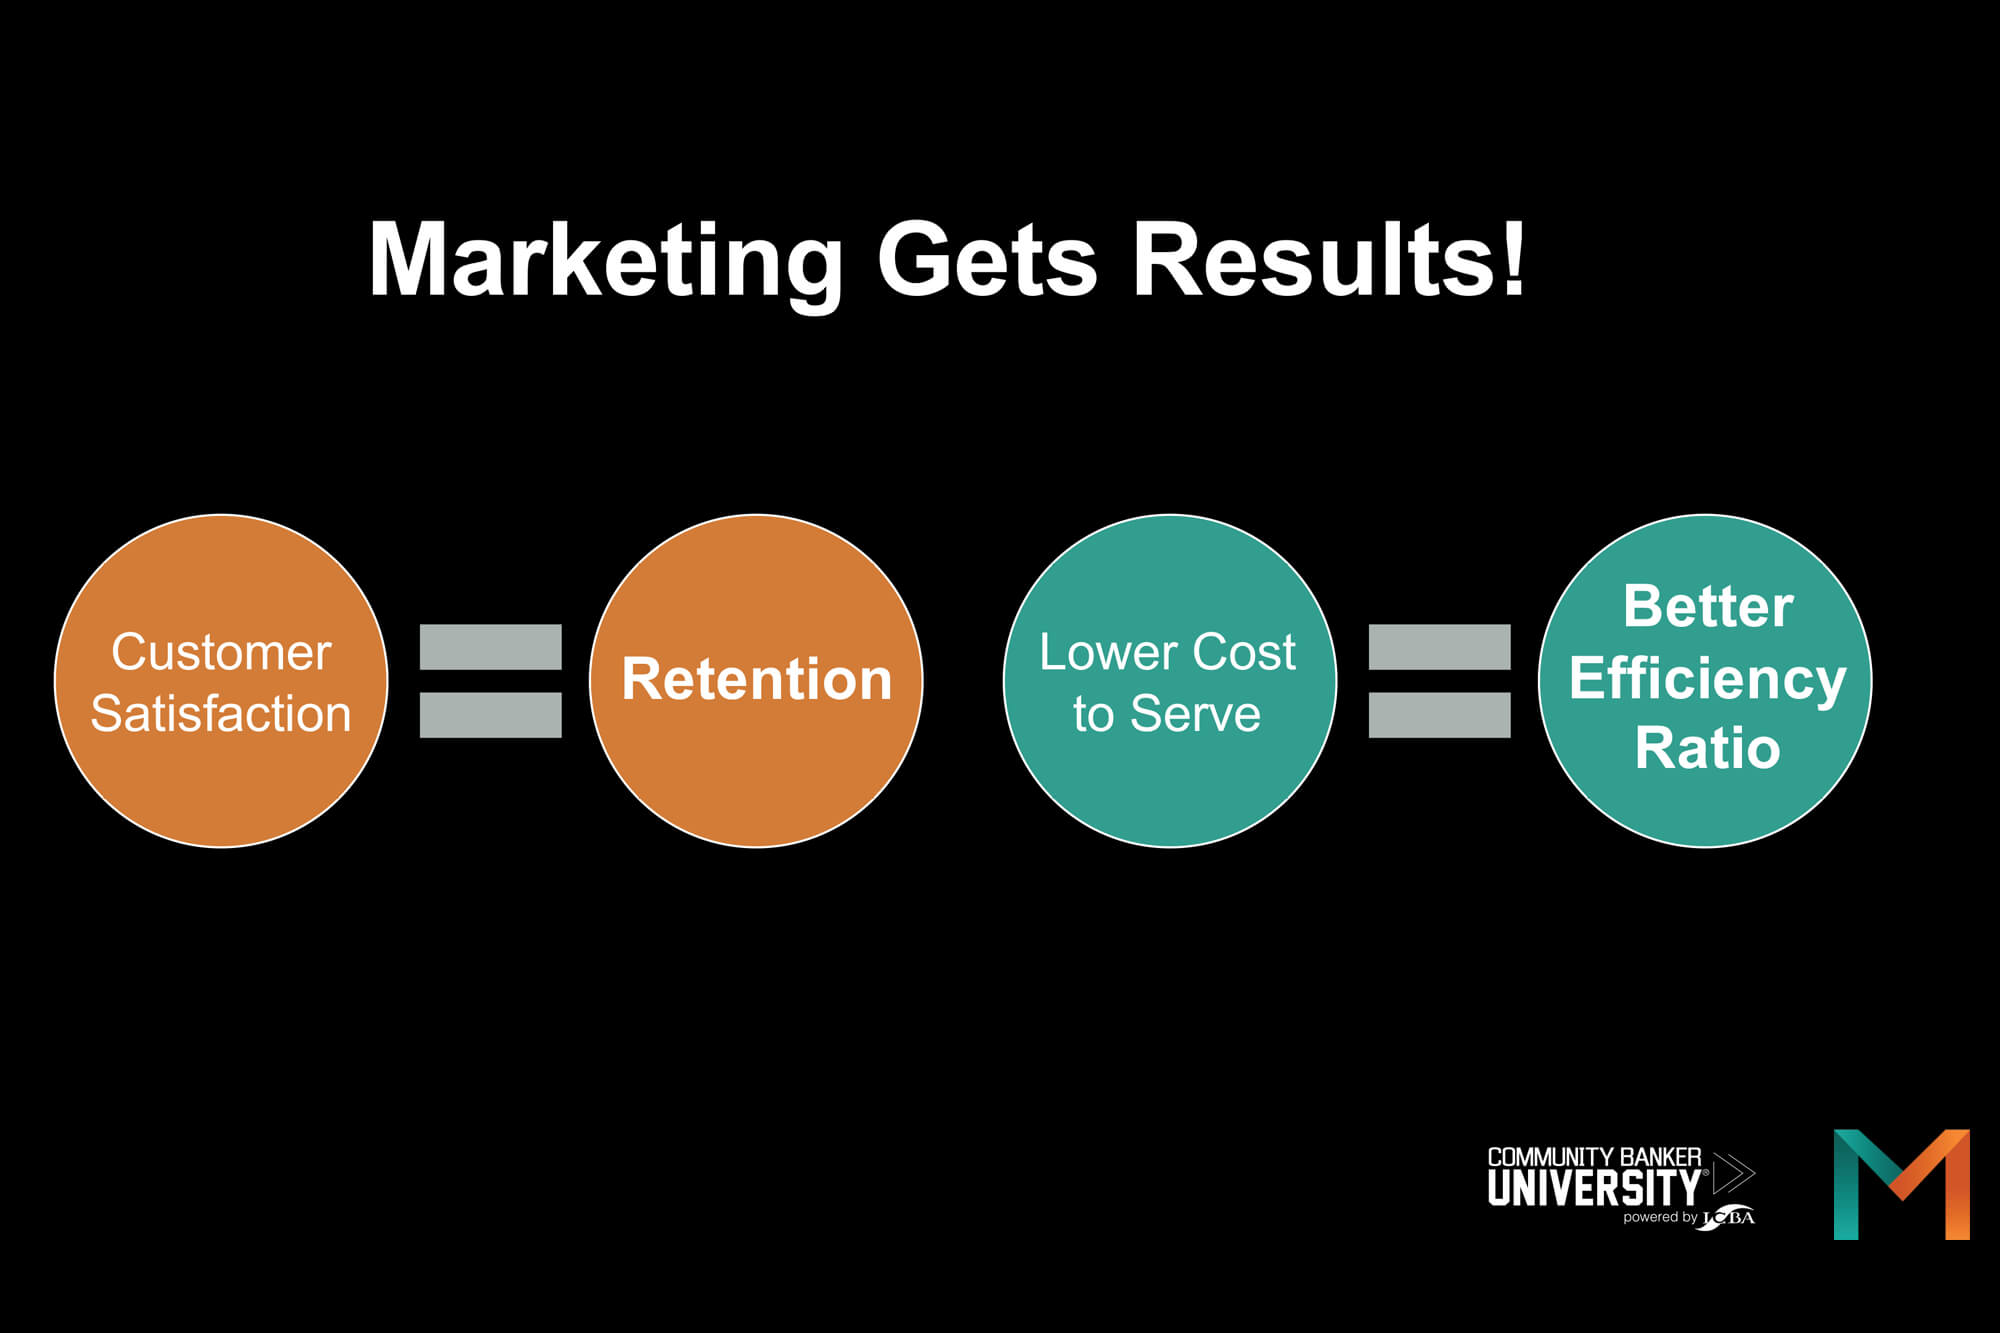 Marketing Gets Results